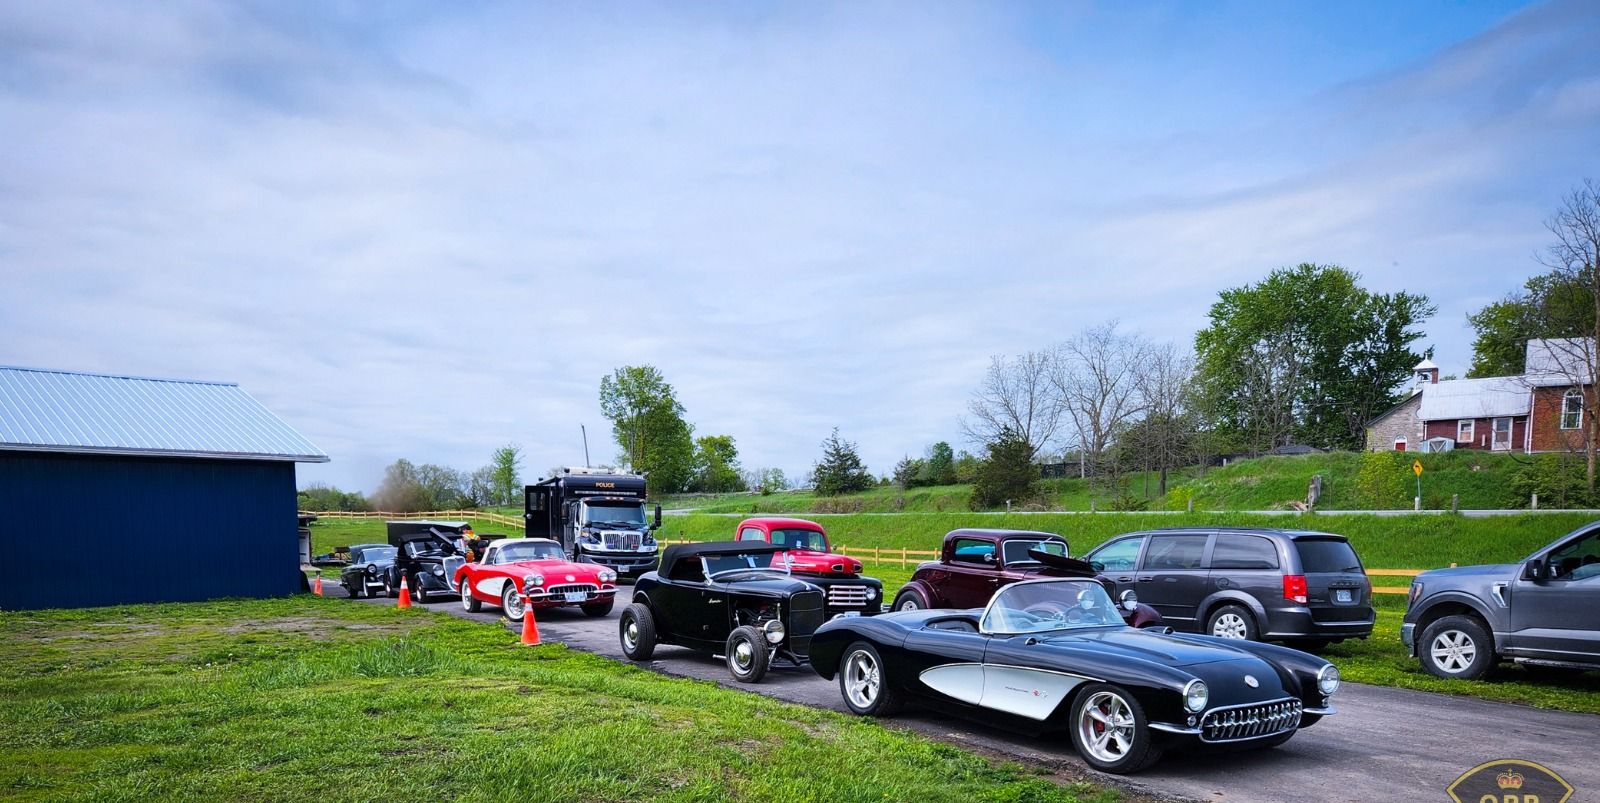 Police in Canada Recover $3 Million Worth of Classic Cars